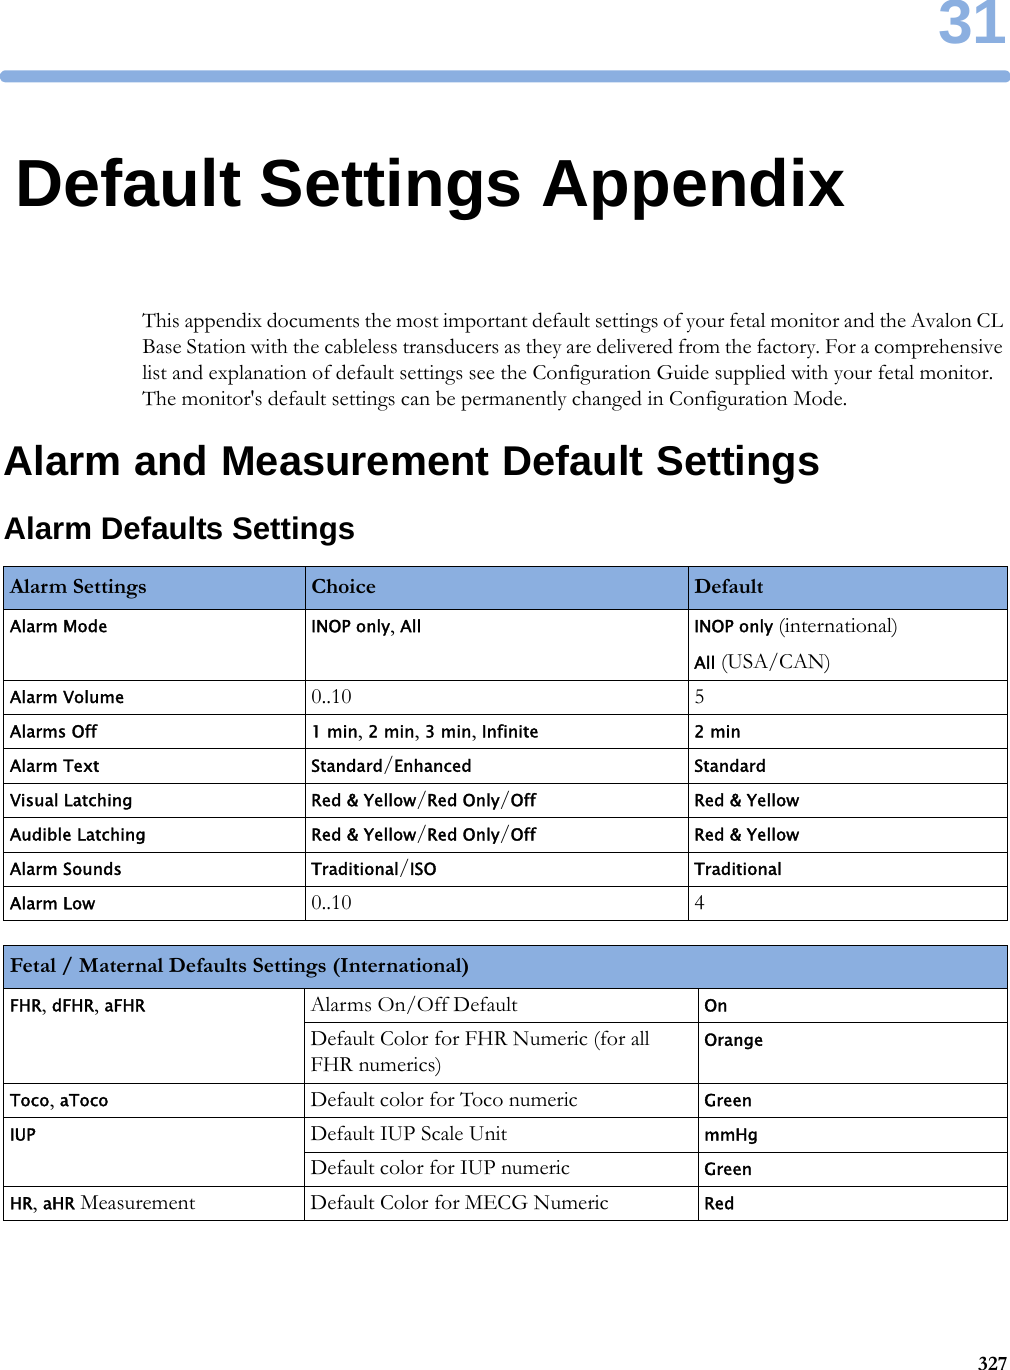 3132731Default Settings AppendixThis appendix documents the most important default settings of your fetal monitor and the Avalon CL Base Station with the cableless transducers as they are delivered from the factory. For a comprehensive list and explanation of default settings see the Configuration Guide supplied with your fetal monitor. The monitor&apos;s default settings can be permanently changed in Configuration Mode.Alarm and Measurement Default SettingsAlarm Defaults SettingsAlarm Settings Choice DefaultAlarm Mode INOP only, All INOP only (international)All (USA/CAN)Alarm Volume 0..10 5Alarms Off 1 min, 2 min, 3 min, Infinite 2 minAlarm Text Standard/Enhanced StandardVisual Latching Red &amp; Yellow/Red Only/Off Red &amp; YellowAudible Latching Red &amp; Yellow/Red Only/Off Red &amp; YellowAlarm Sounds Traditional/ISO TraditionalAlarm Low 0..10 4Fetal / Maternal Defaults Settings (International)FHR, dFHR, aFHR Alarms On/Off Default OnDefault Color for FHR Numeric (for all FHR numerics)OrangeToco, aToco Default color for Toco numeric GreenIUP Default IUP Scale Unit mmHgDefault color for IUP numeric GreenHR, aHR Measurement Default Color for MECG Numeric Red